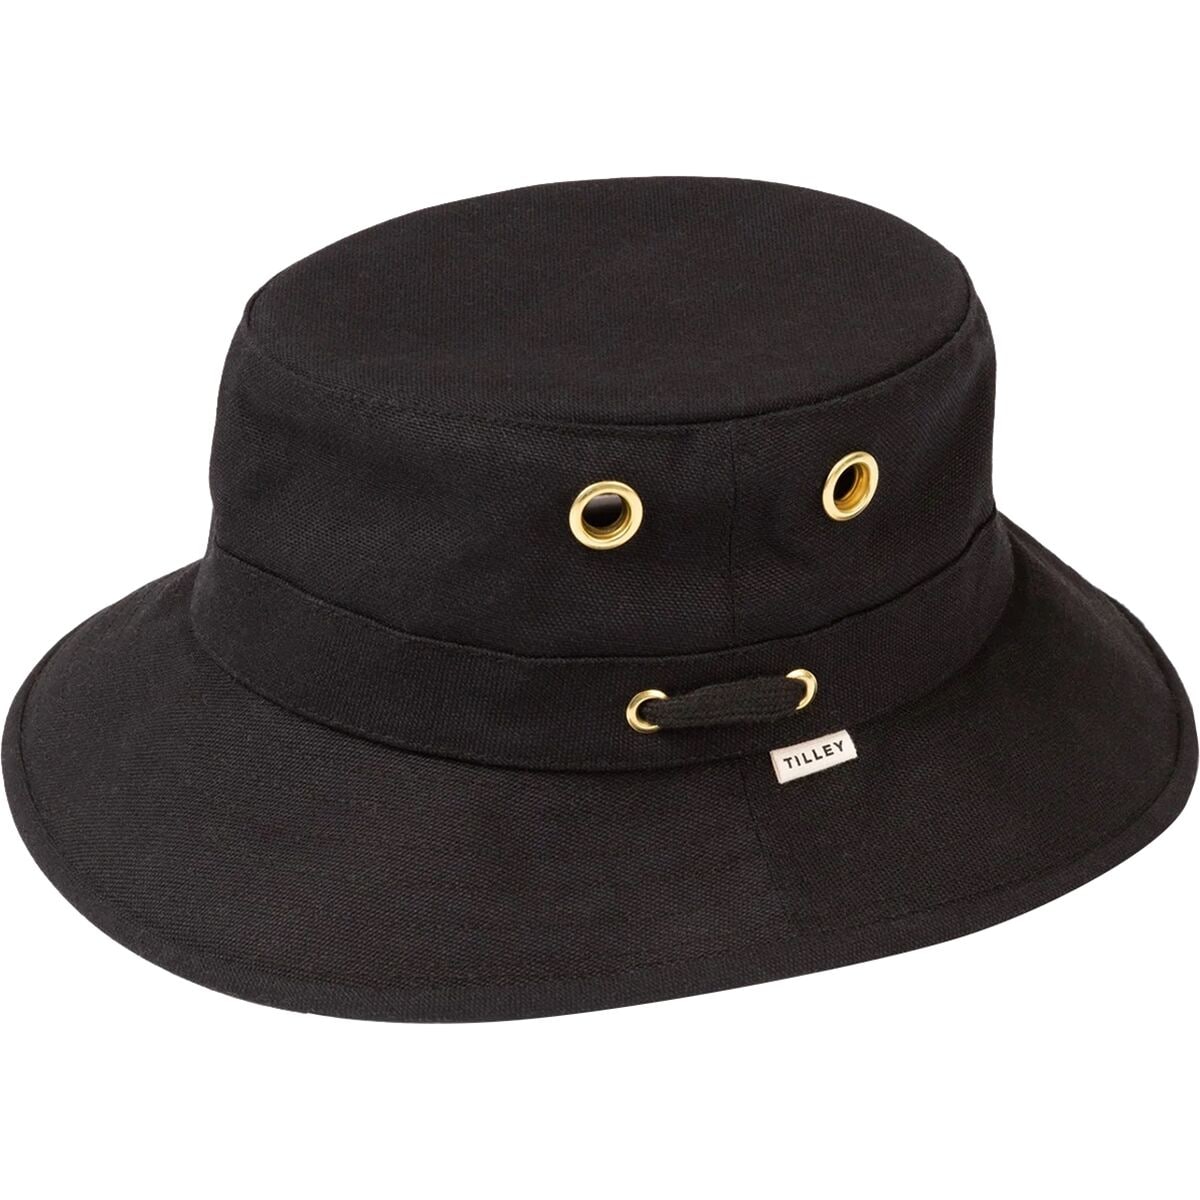 Tilley The Iconic T1 Bucket Hat - Accessories